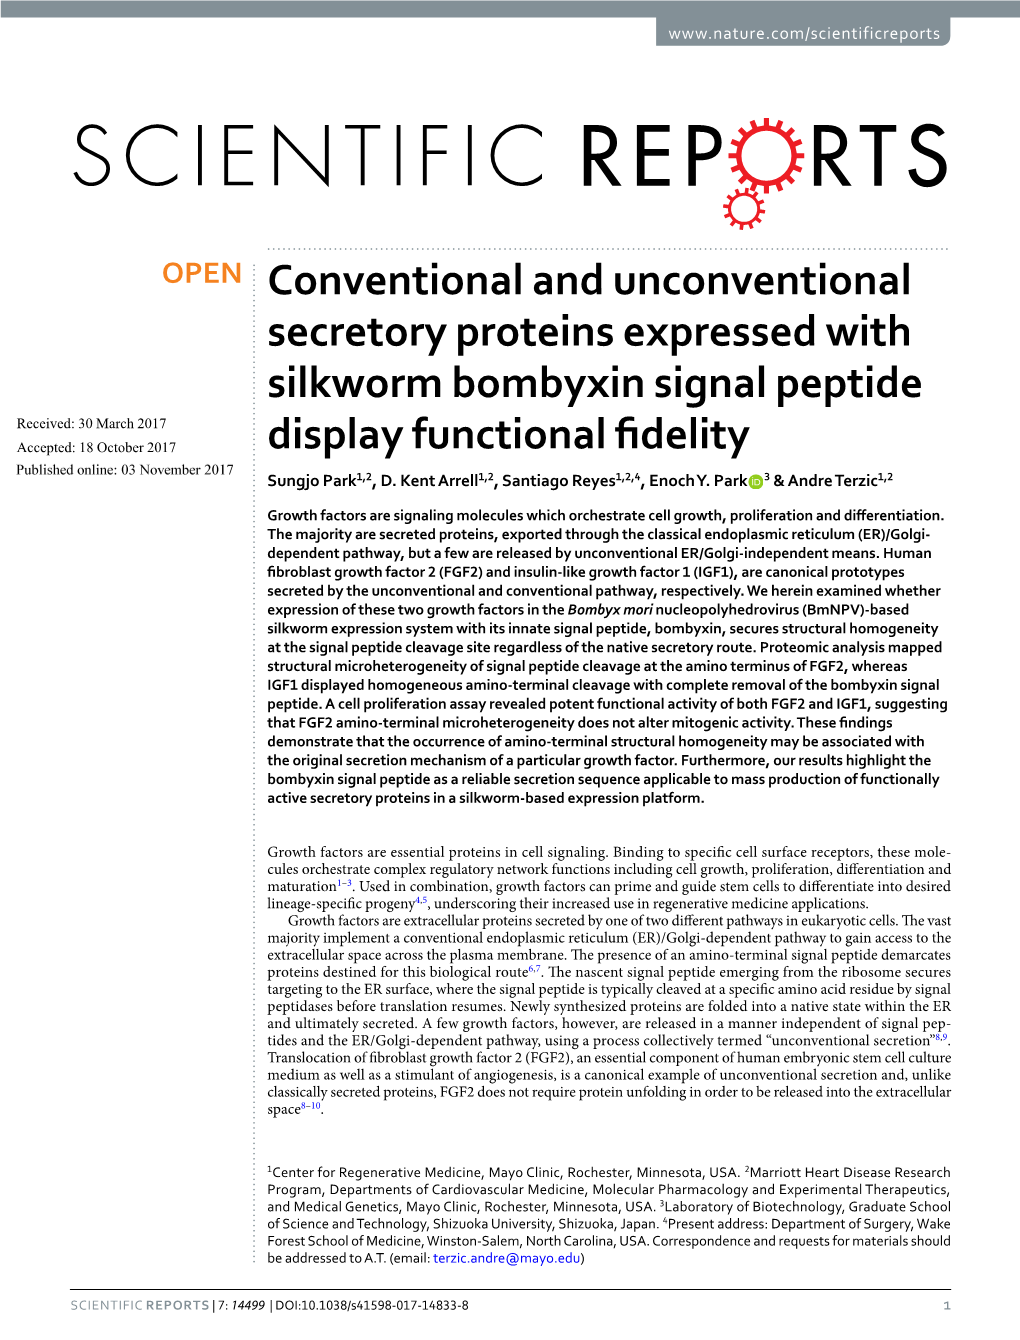 Conventional and Unconventional Secretory Proteins Expressed With